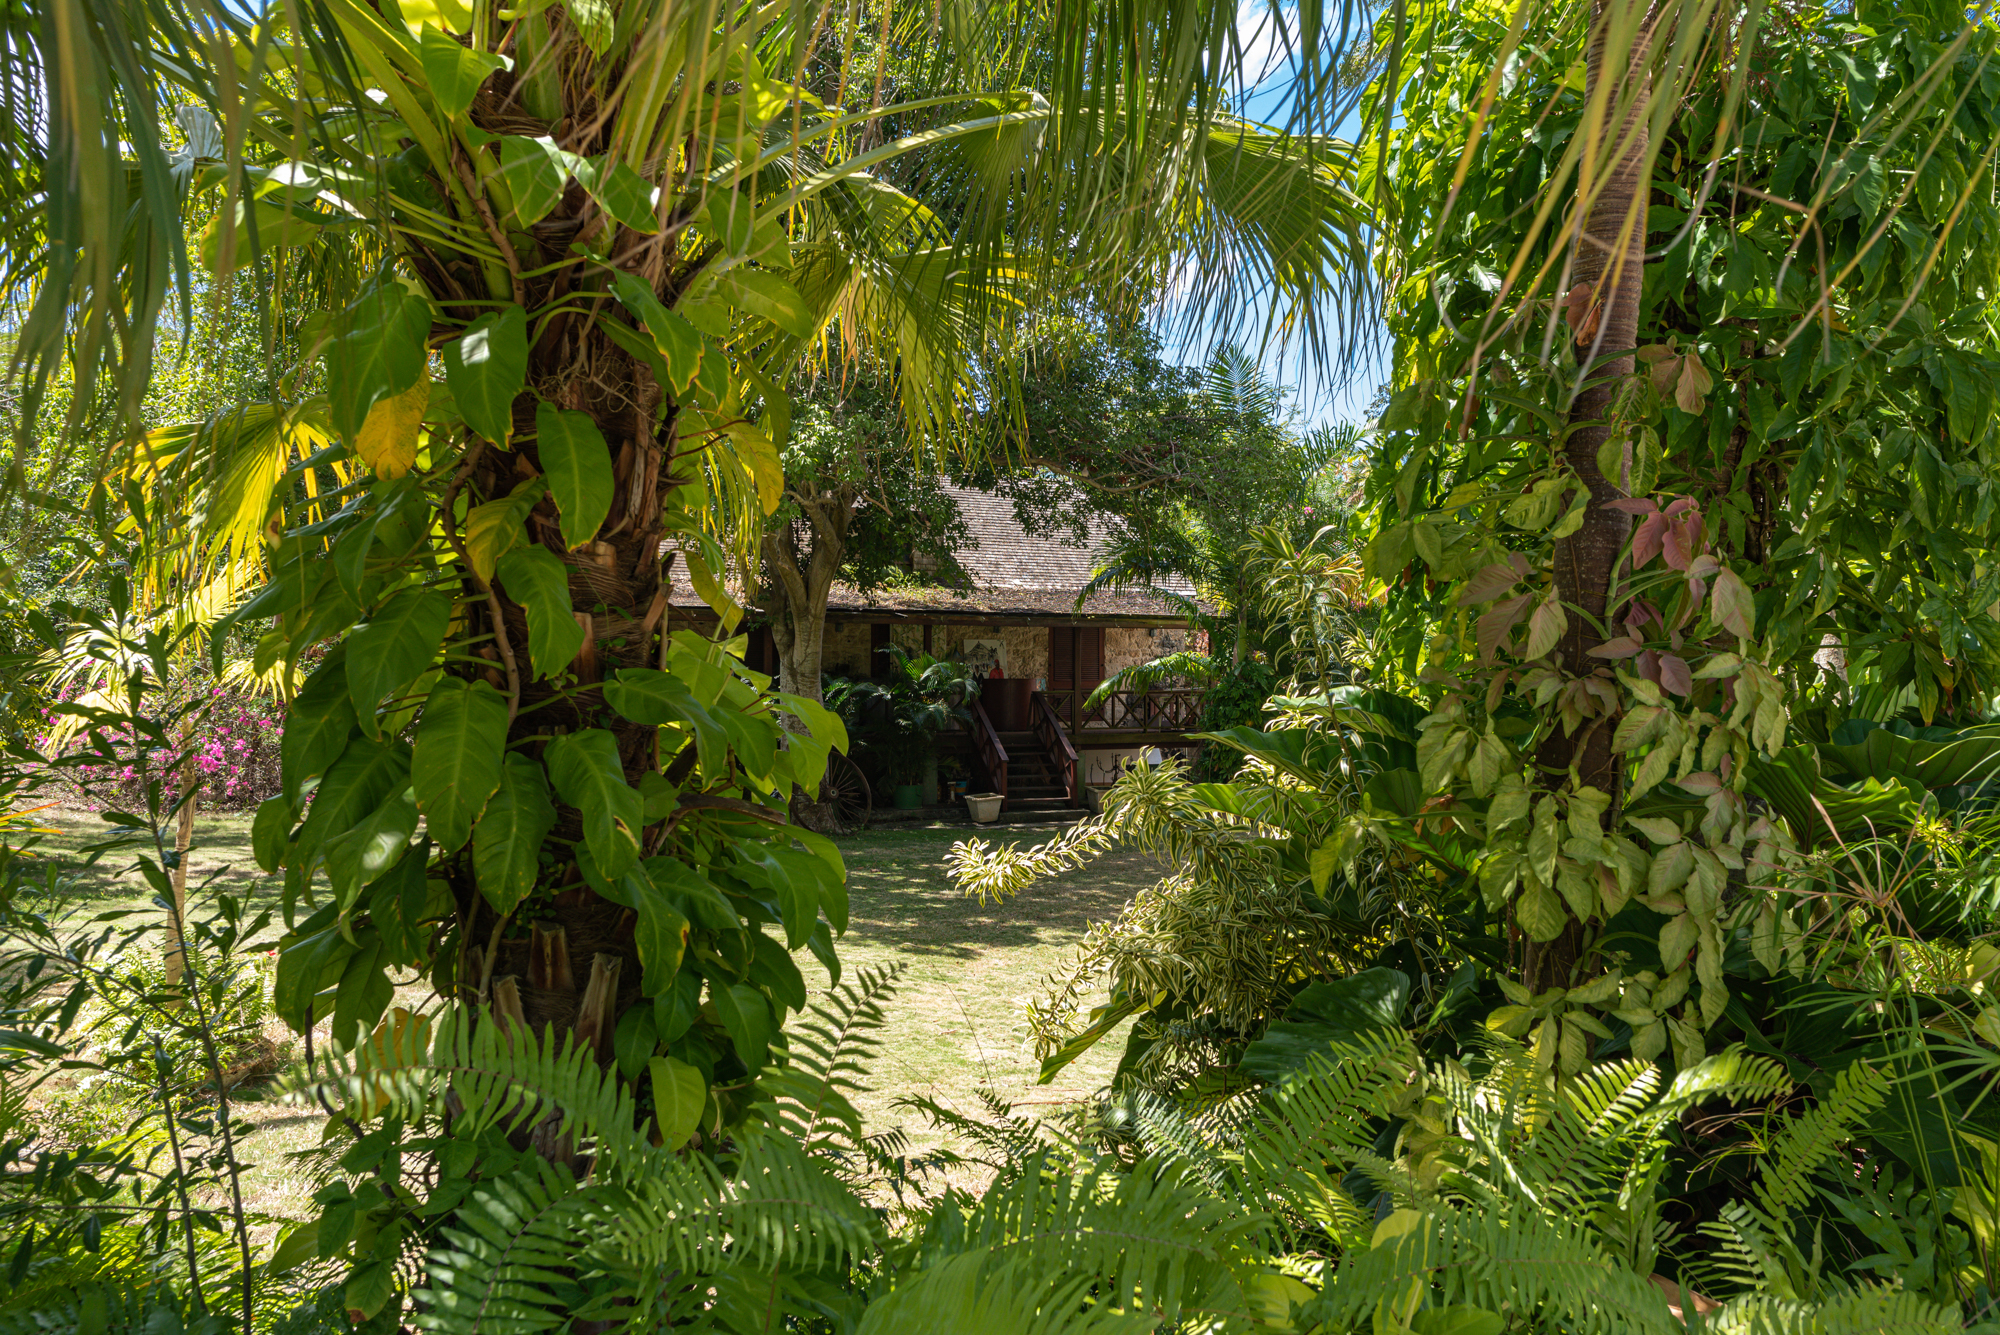 Lancaster Great House cottage surrounded by tropical lush gardens